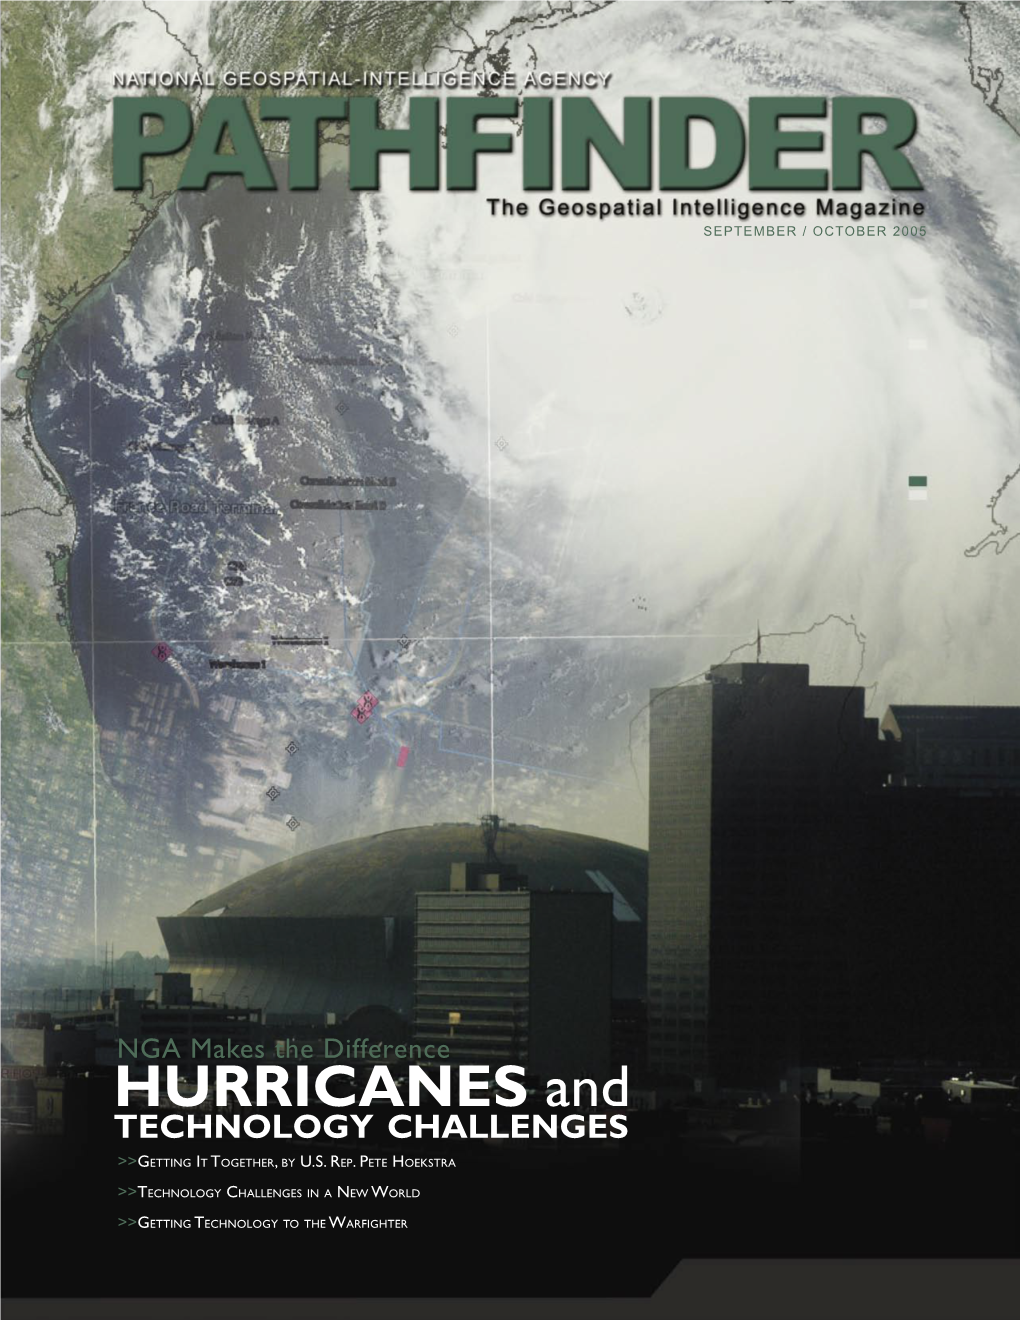 HURRICANES and TECHNOLOGY CHALLENGES >>GETTING IT TOGETHER, by U.S